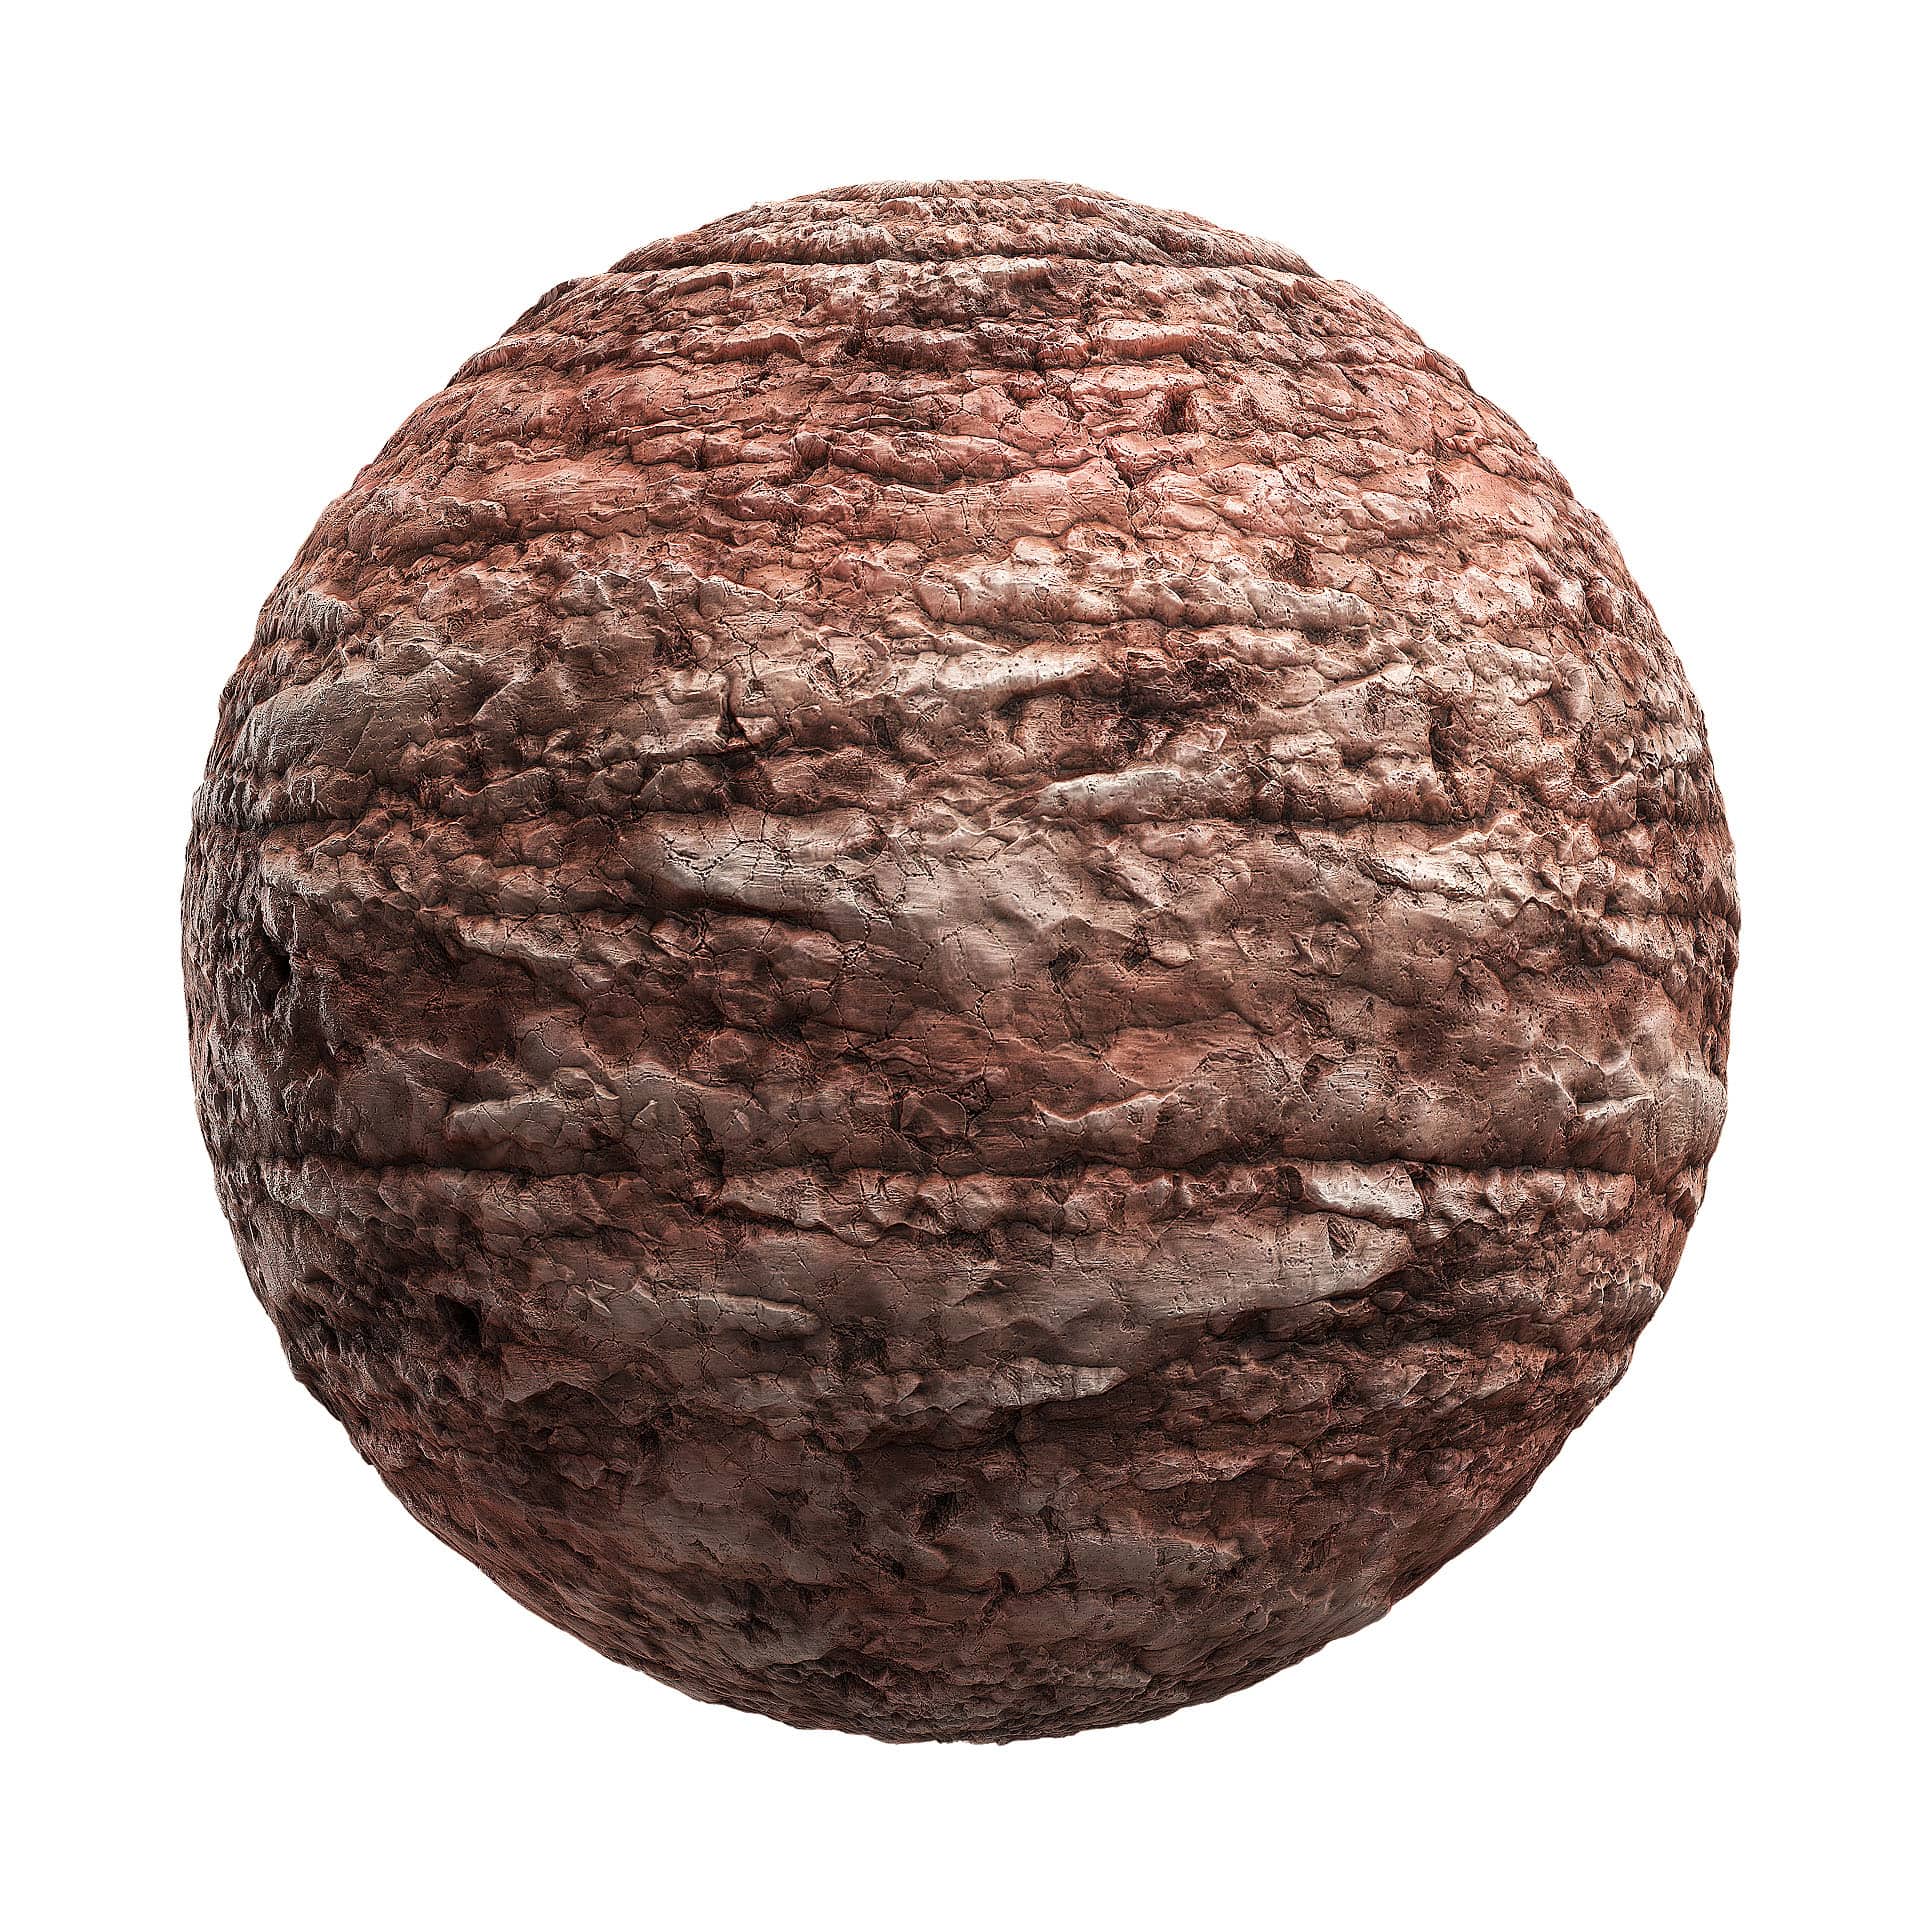 Red Rock Cliff PBR Texture